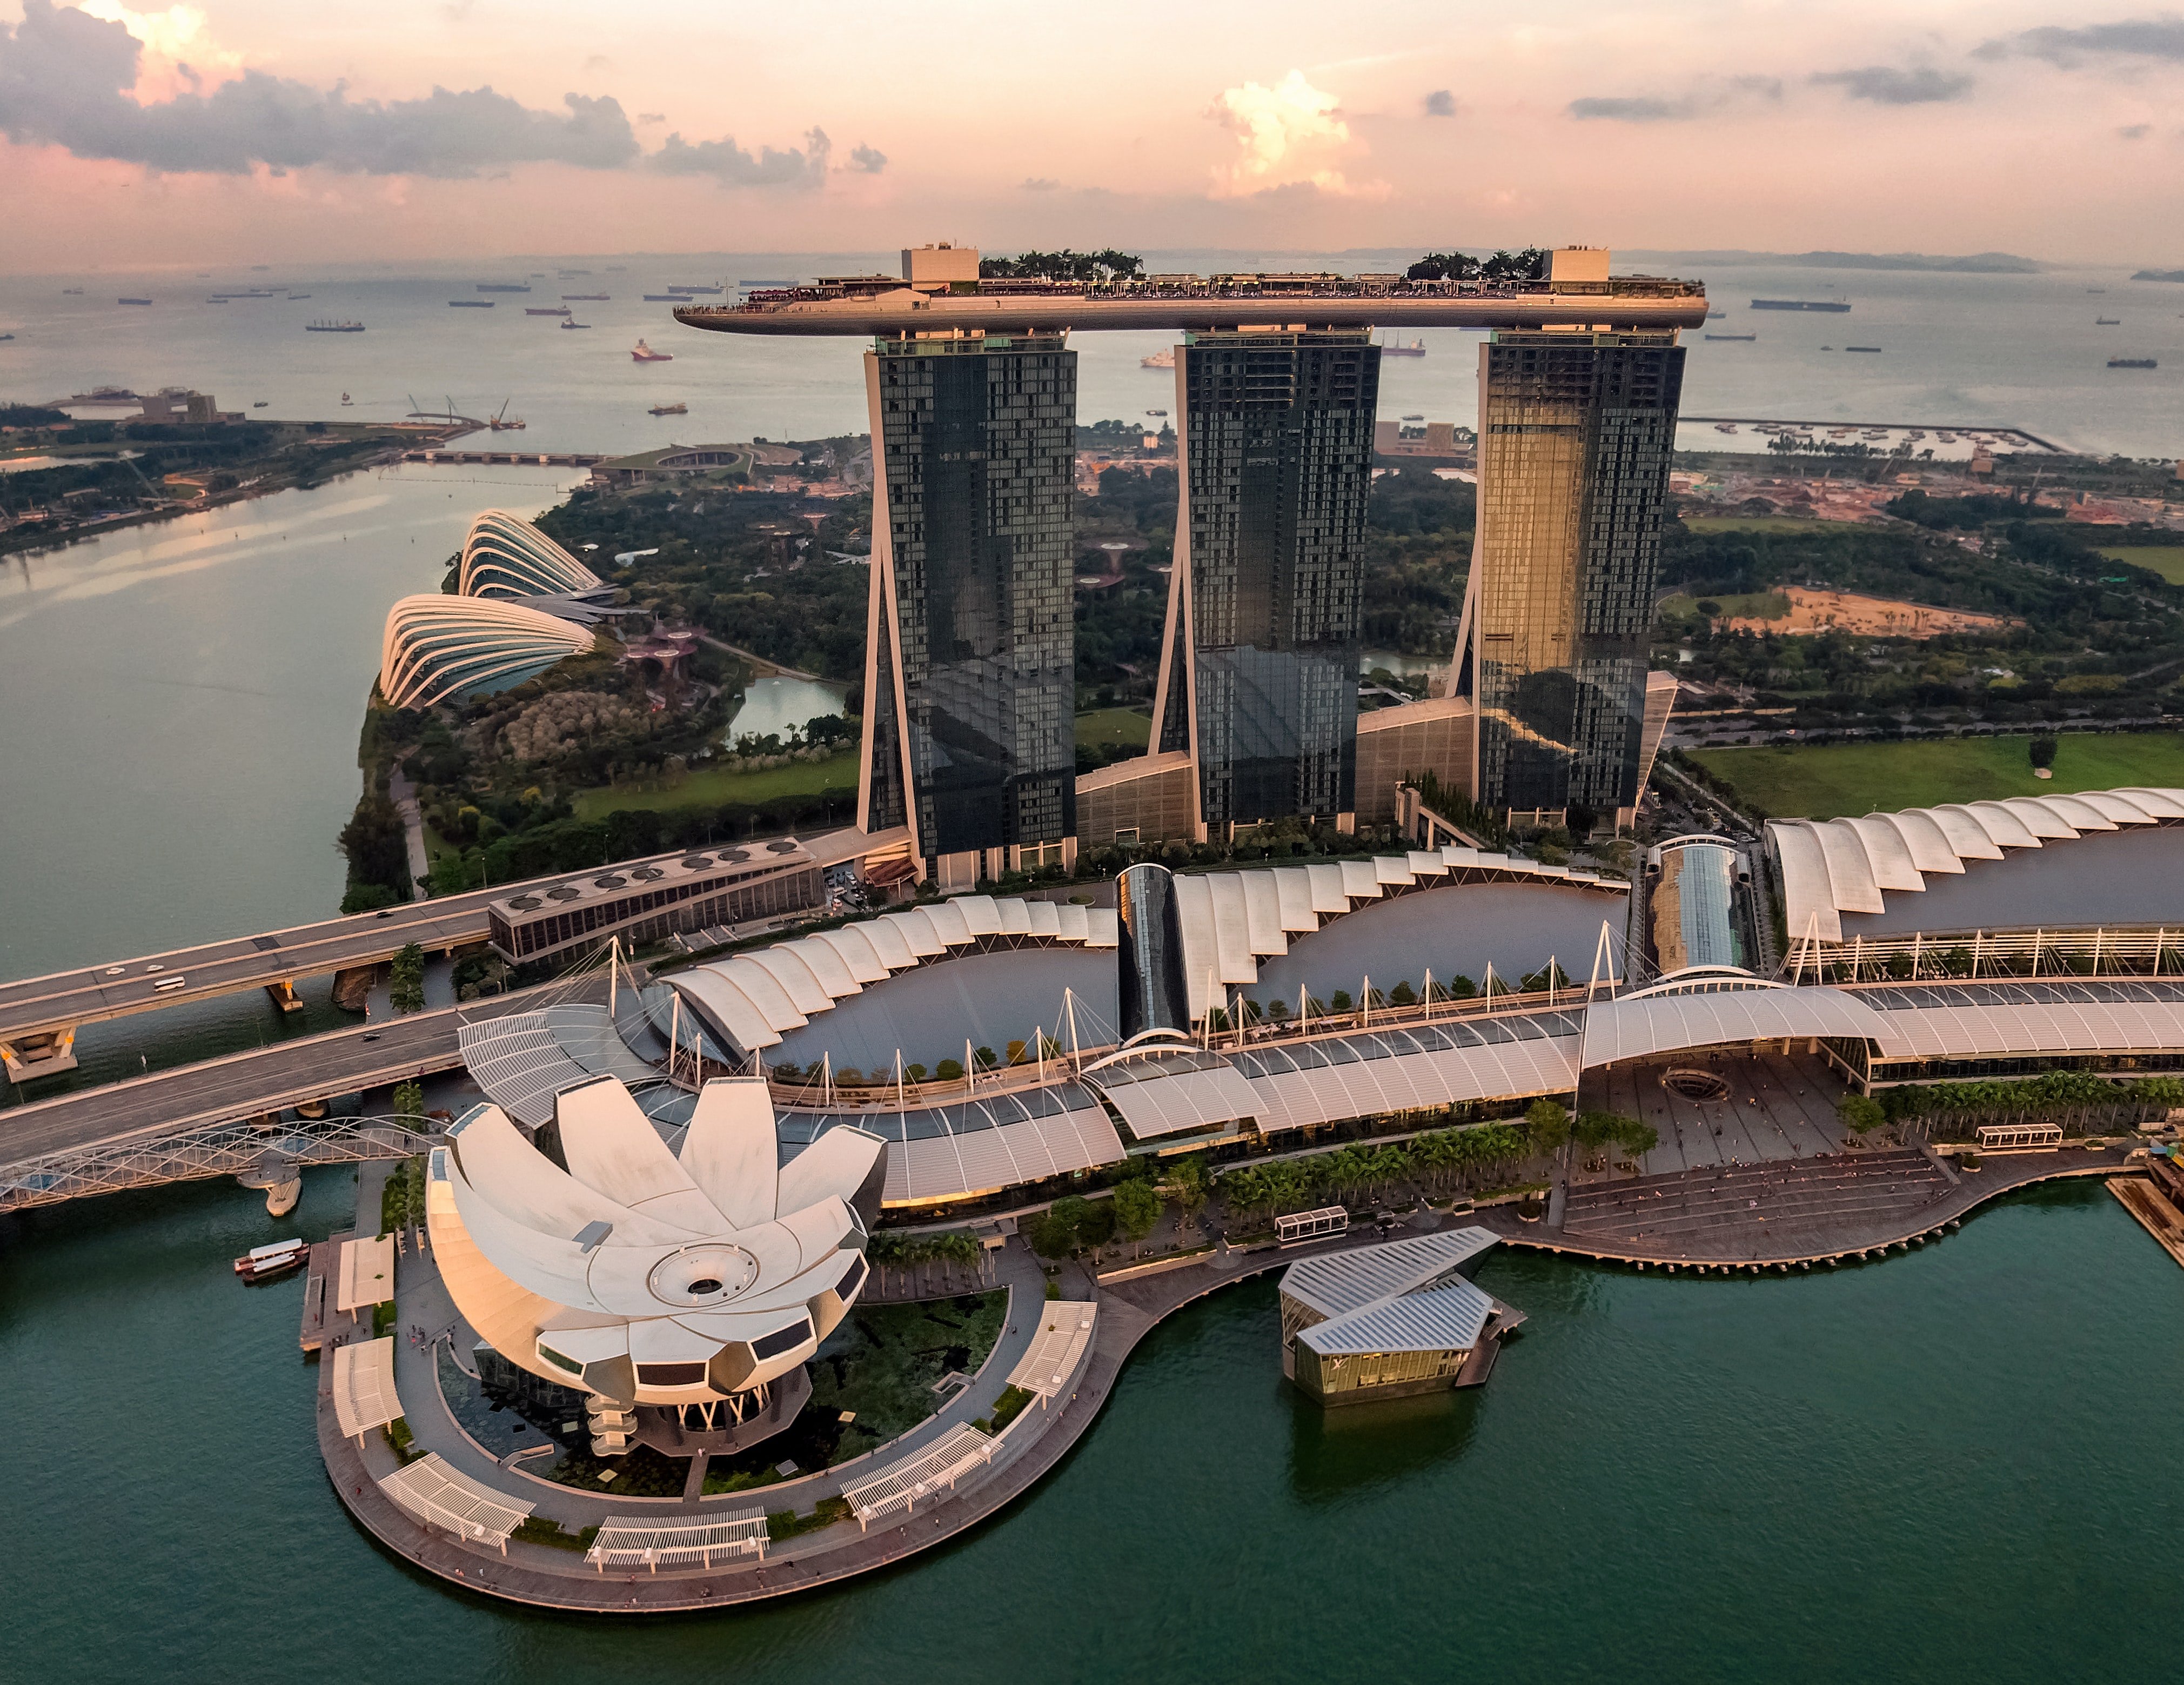 Singapore overview from the sky